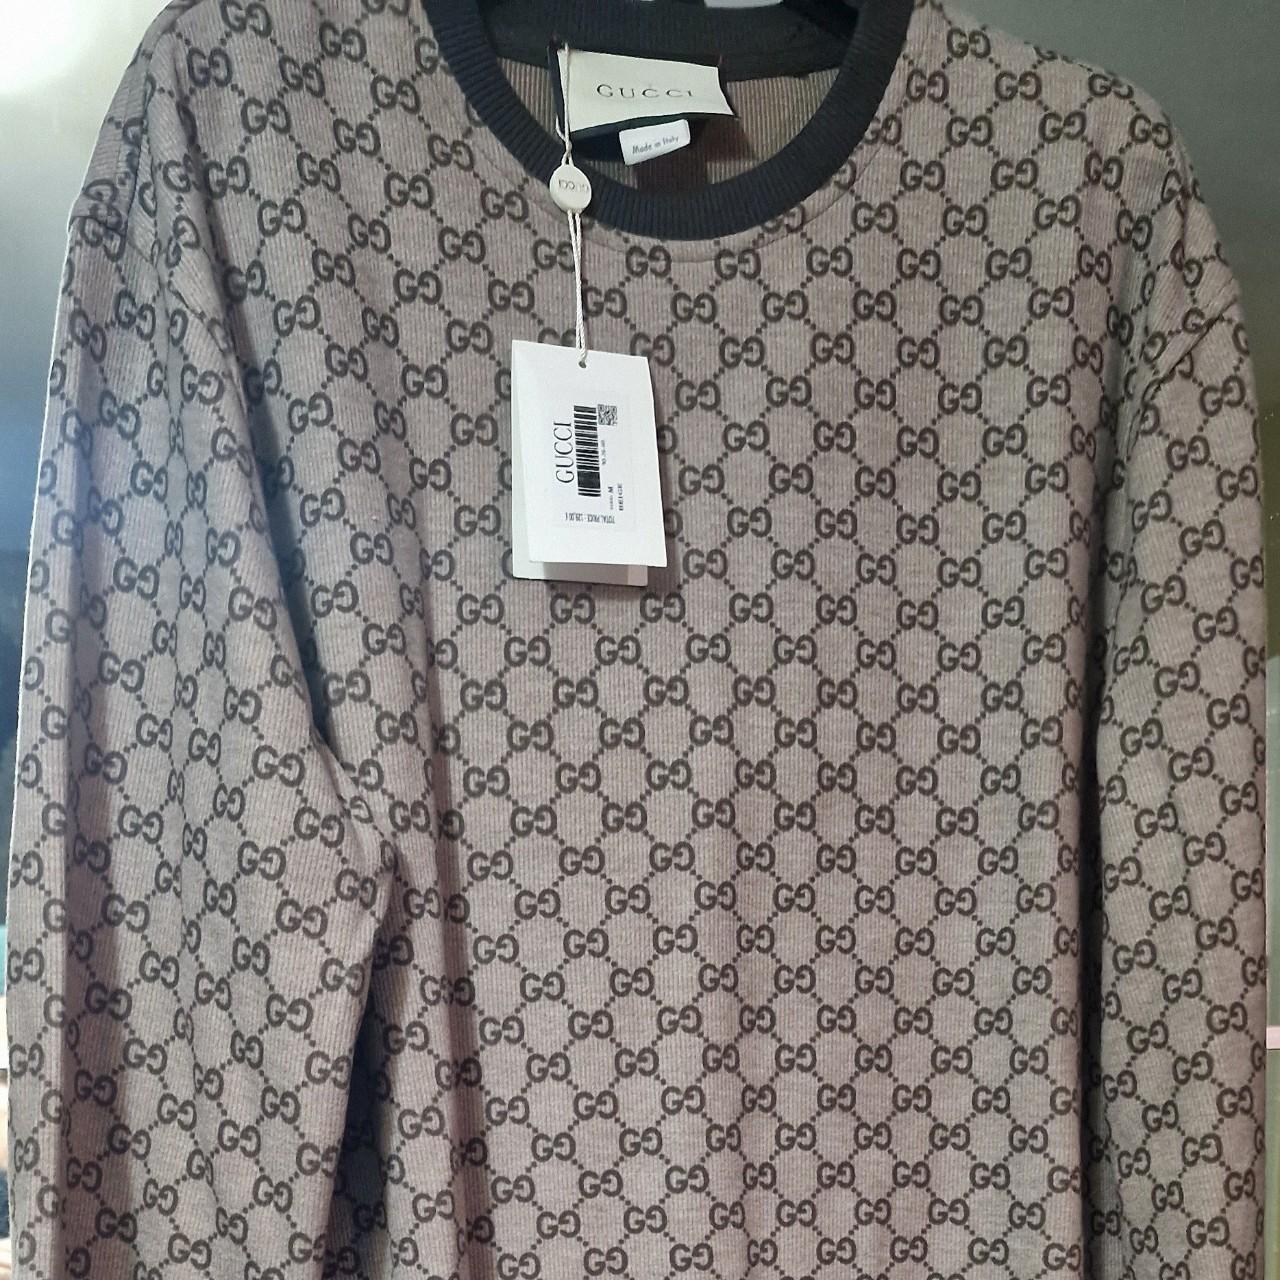 Gucci mens jumper brand new with tags never been... - Depop